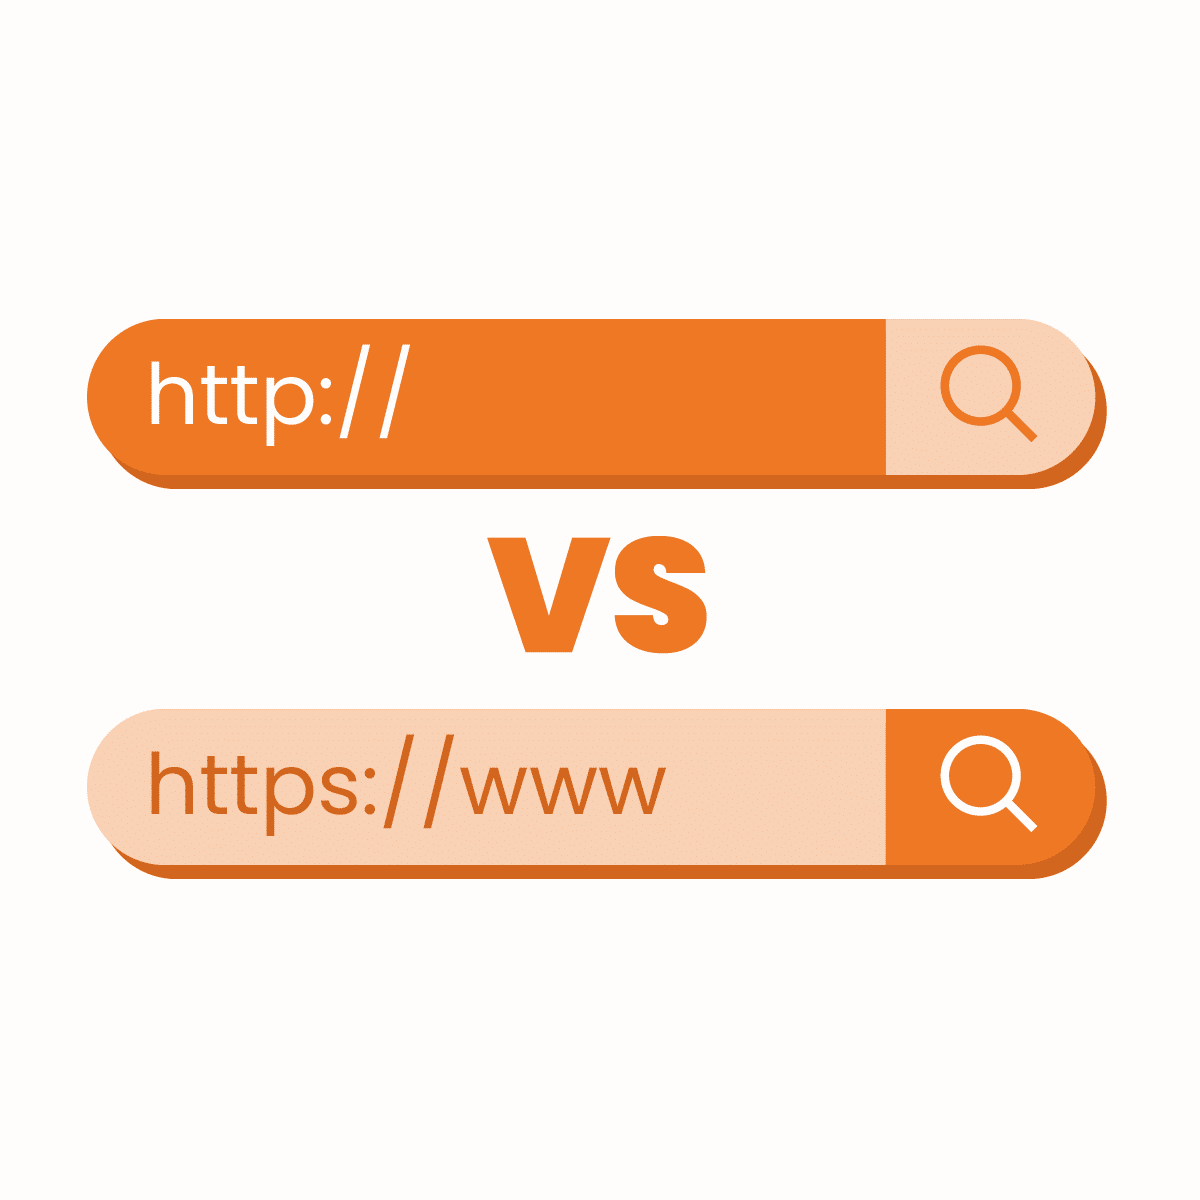 HTTP vs HTTPS: An In-depth Comparison of Features